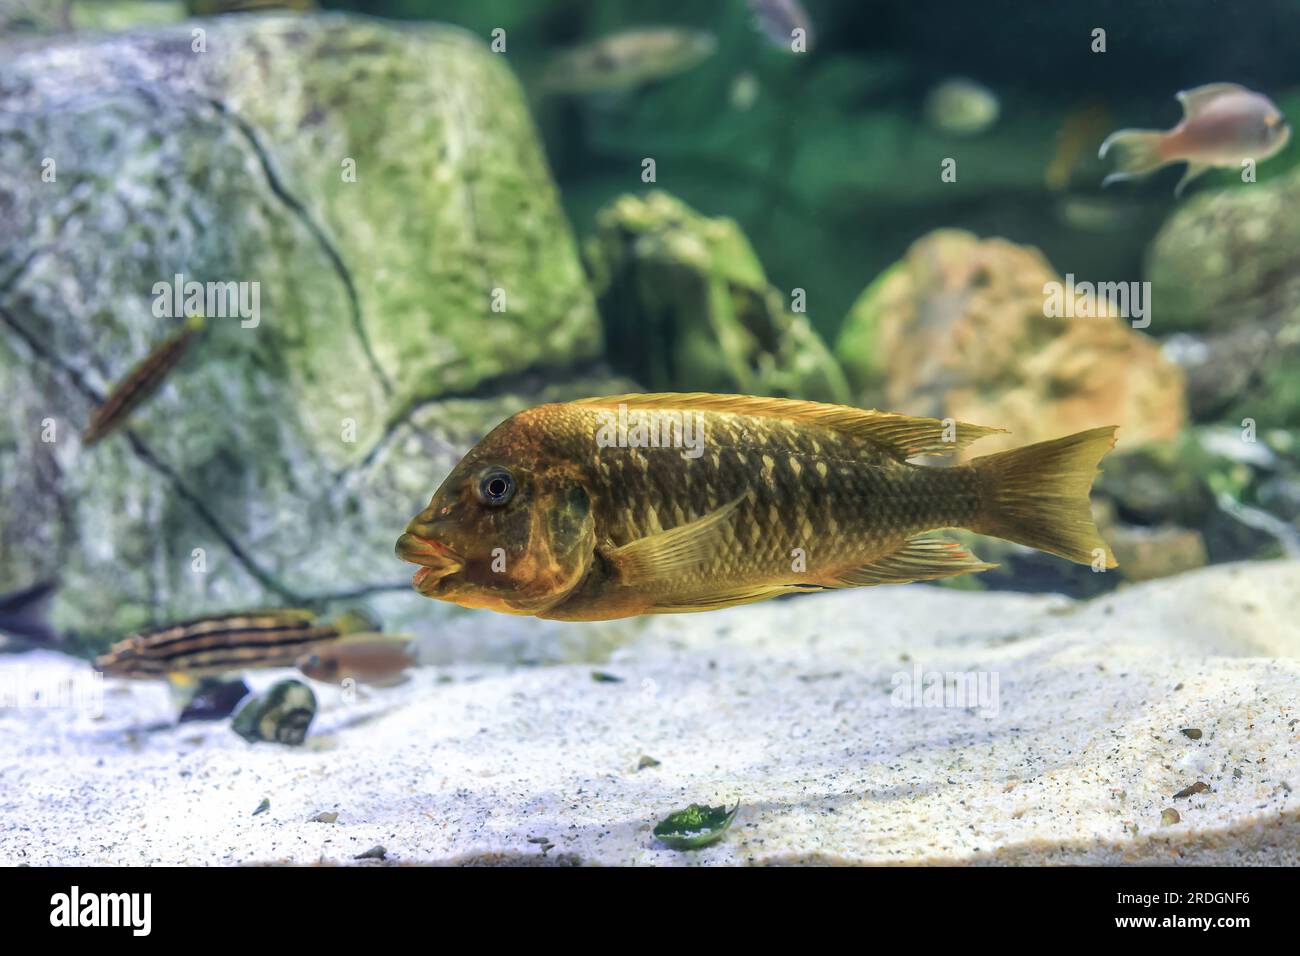 Petrochromis trewavasae brown fish swimming in aquarium. Threadfin cichlids endemic of Lake Tanganyika in east Africa. Yellow and brown colors fish sw Stock Photo